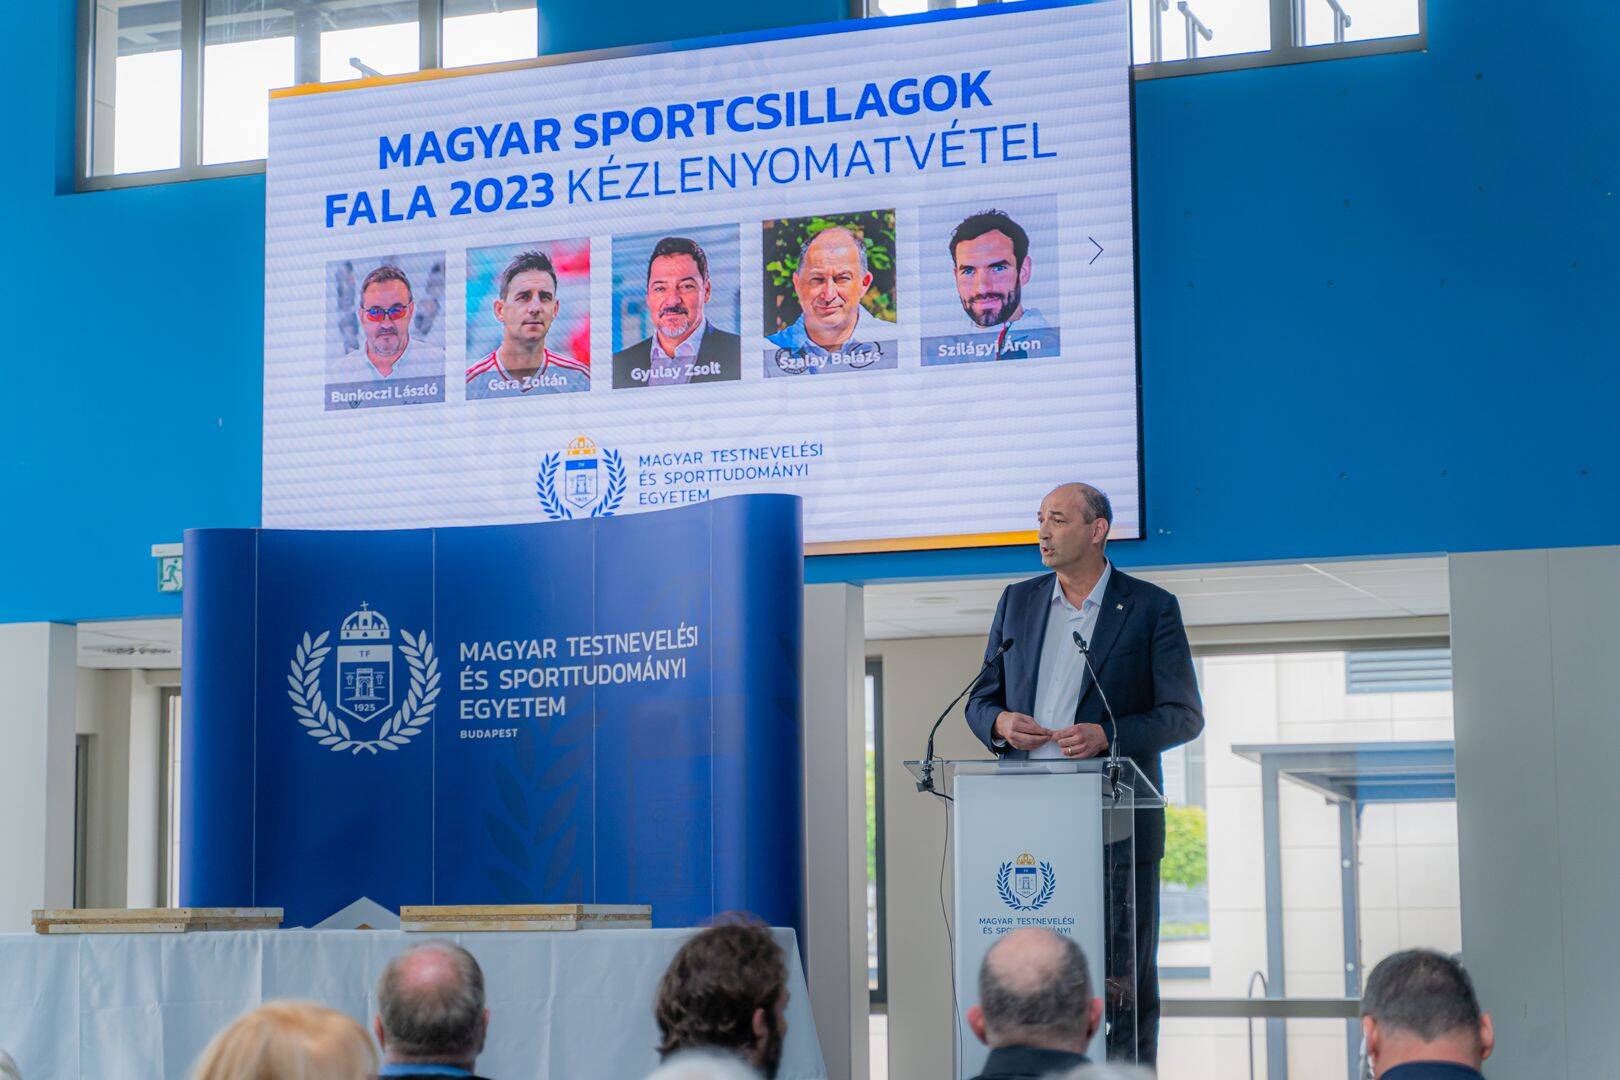 New handprints to be added to the Wall of Hungarian Sports Stars